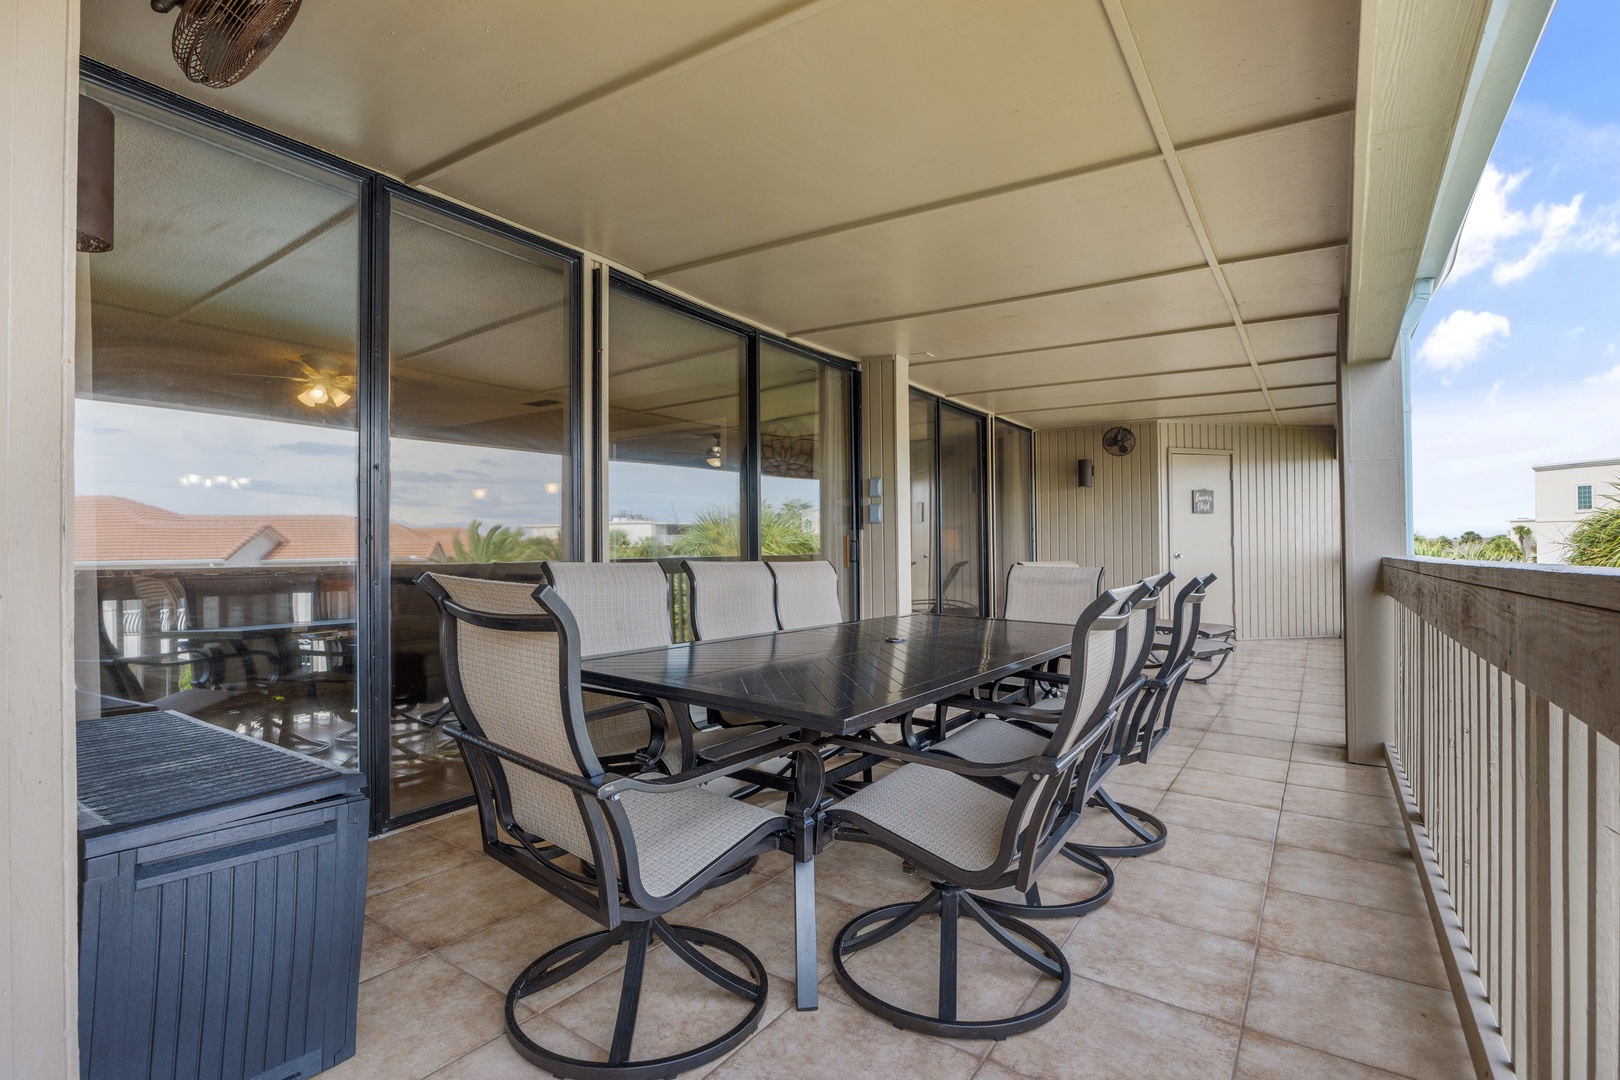 Dine al fresco or lounge in the fresh air with gorgeous views on the balcony